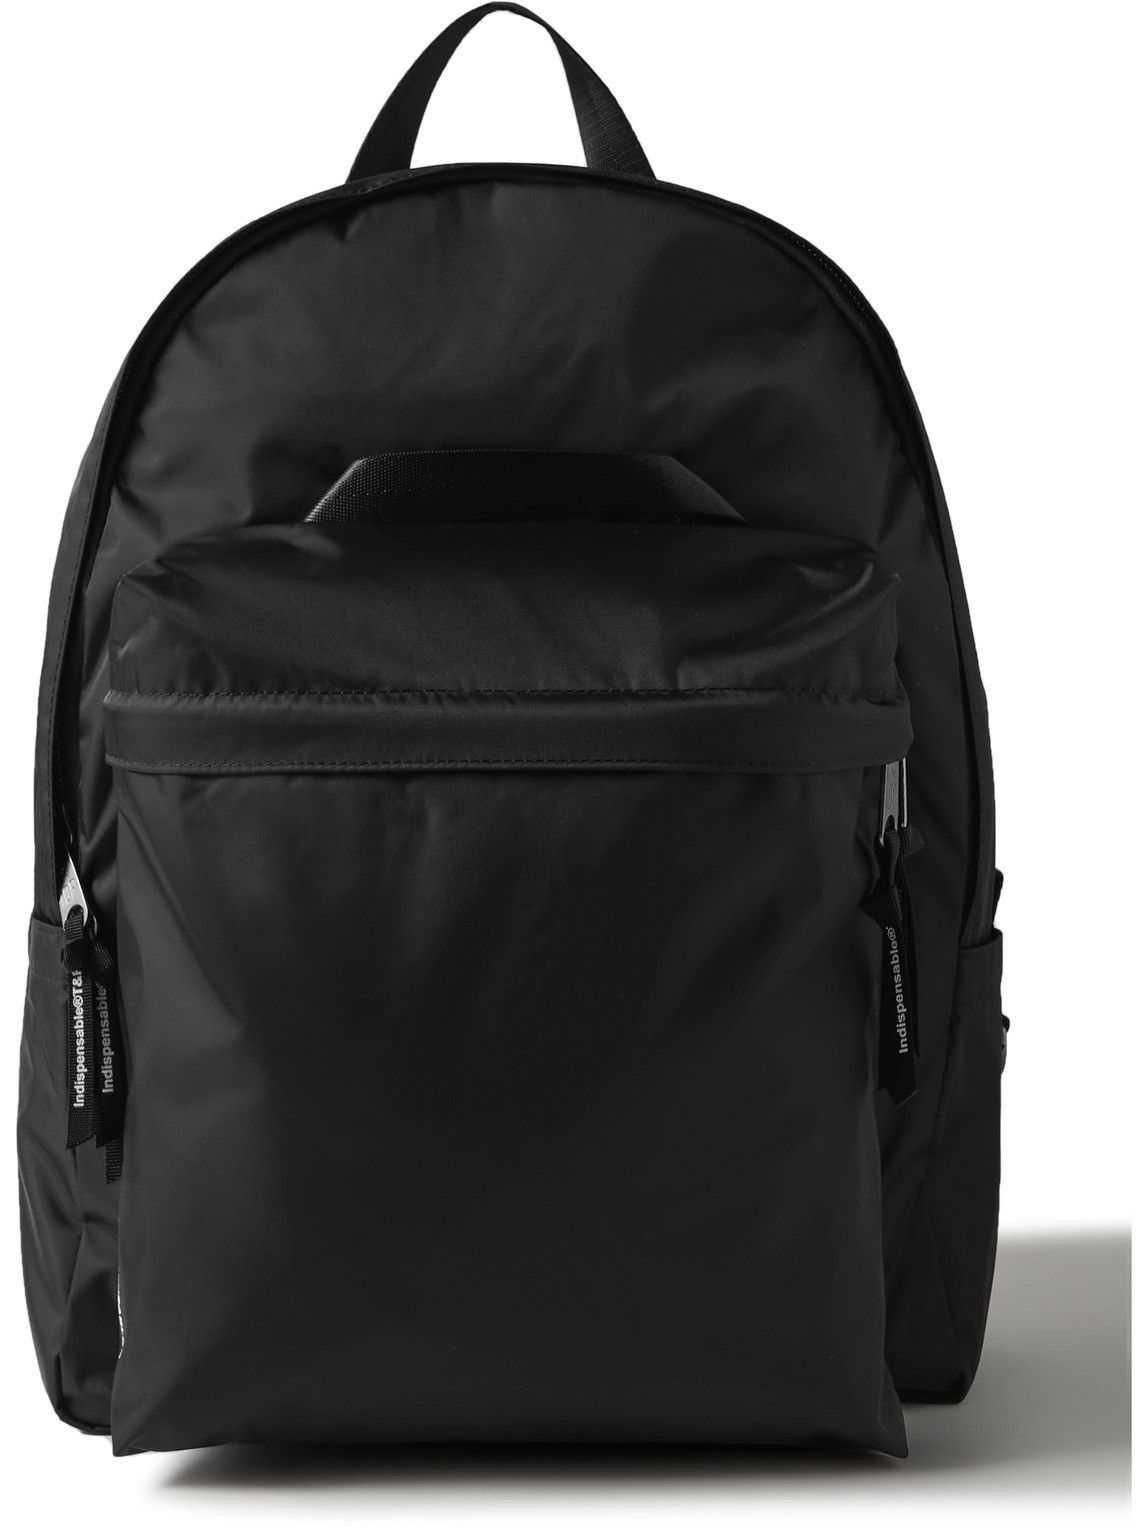 Photo: Indispensable - Small ECONYL Backpack